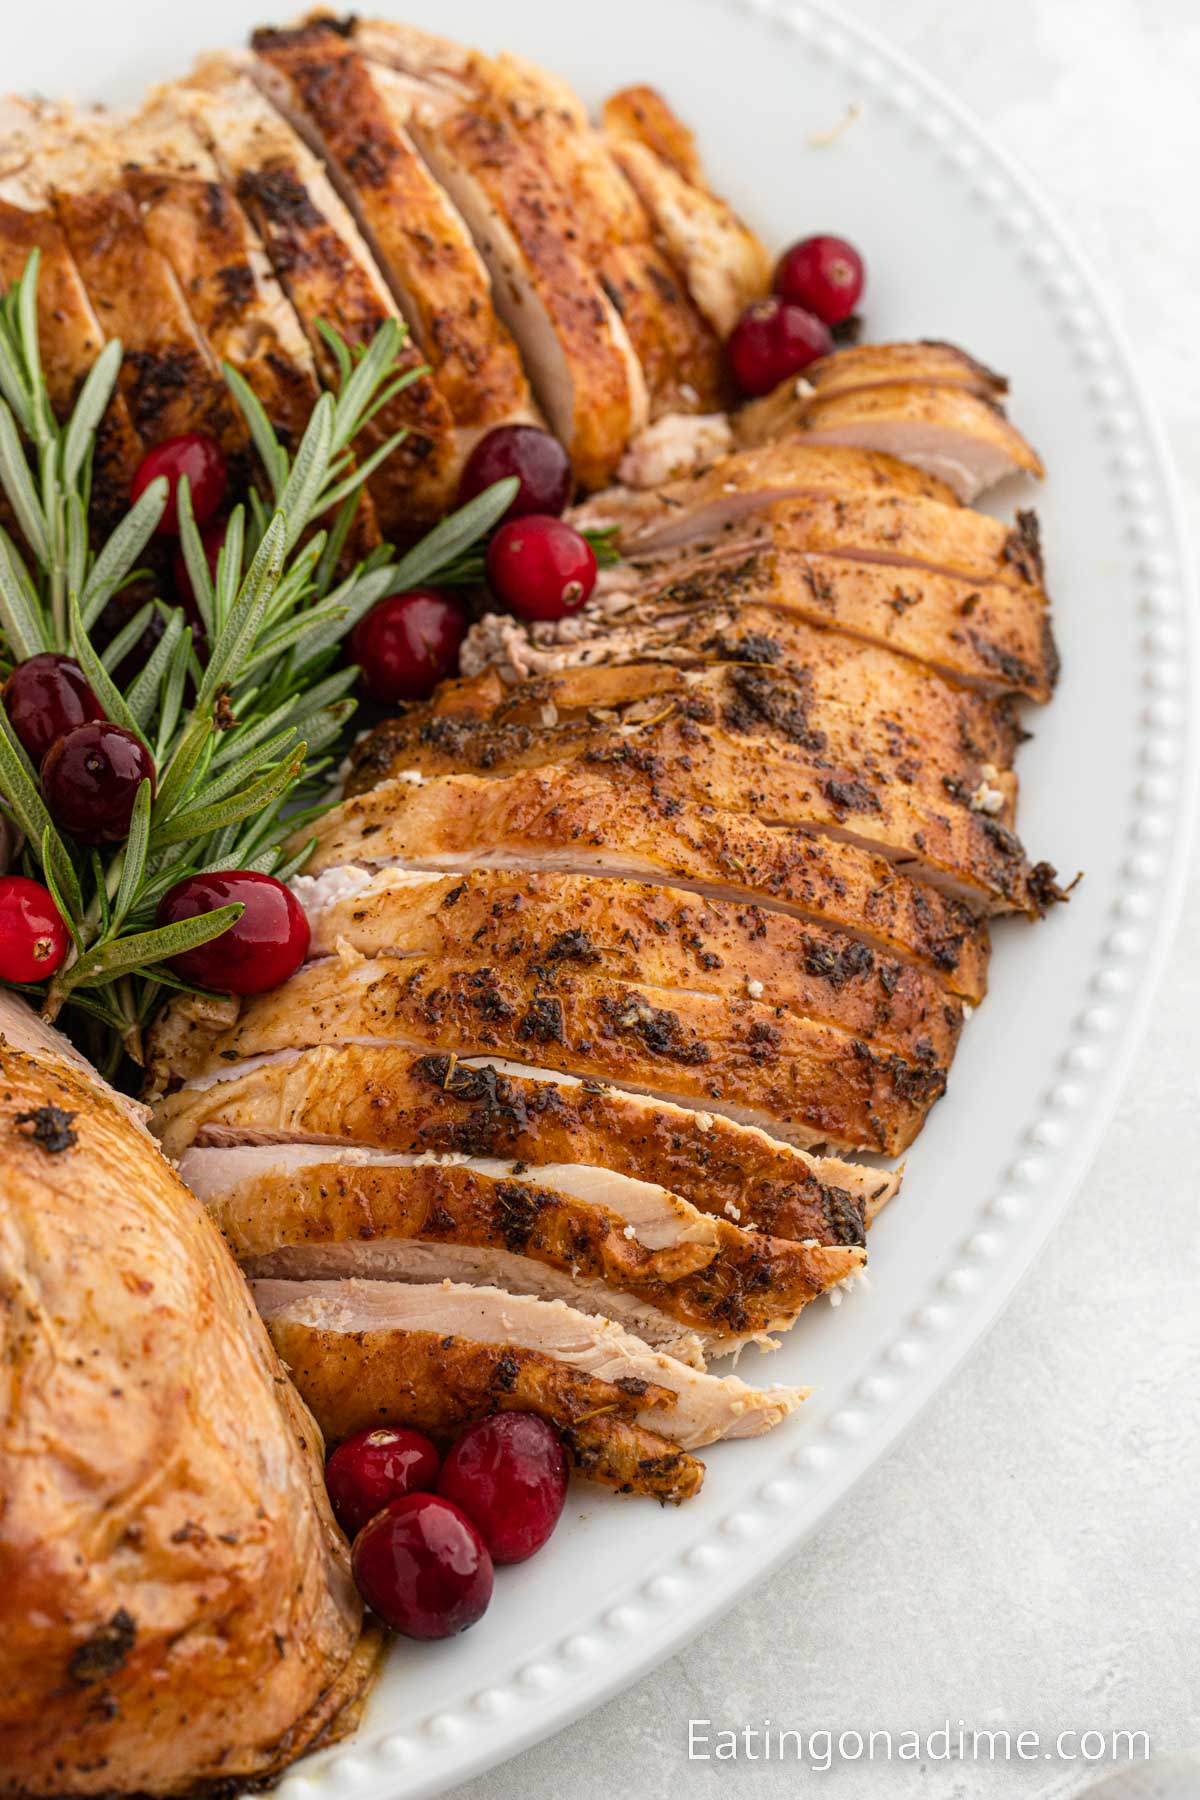 Grilled Turkey on a platter with fresh herbs and berries